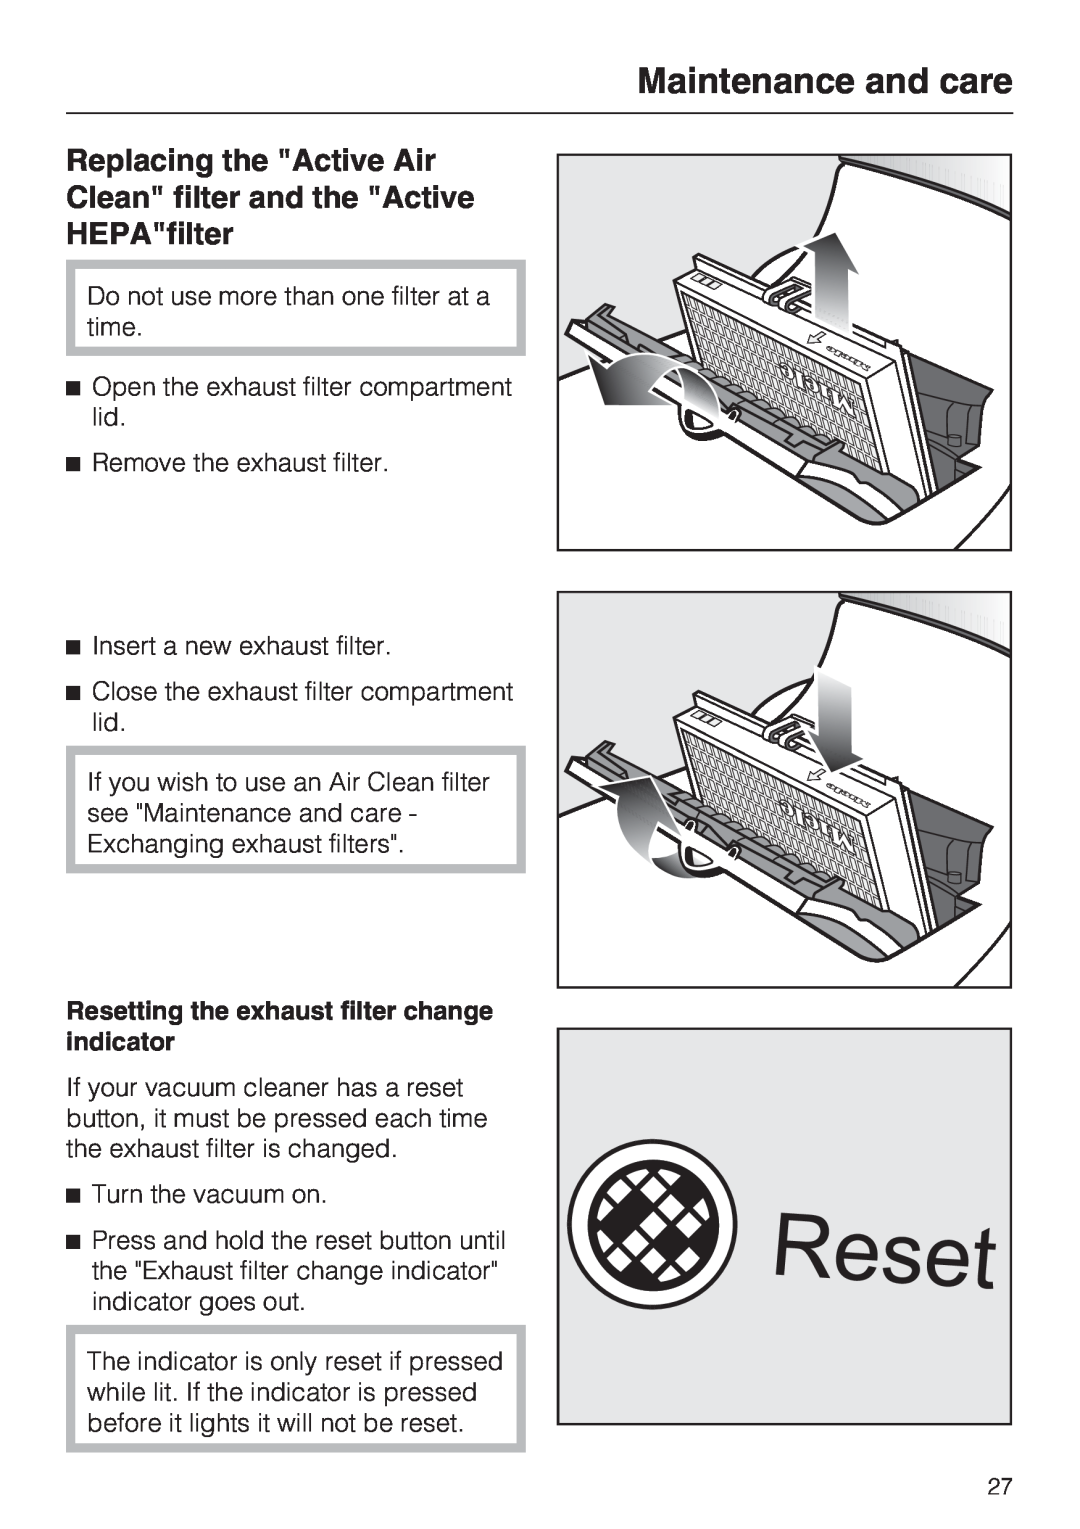 Miele S 7000 operating instructions Replacing the Active Air, Clean filter and the Active HEPAfilter, Maintenance and care 